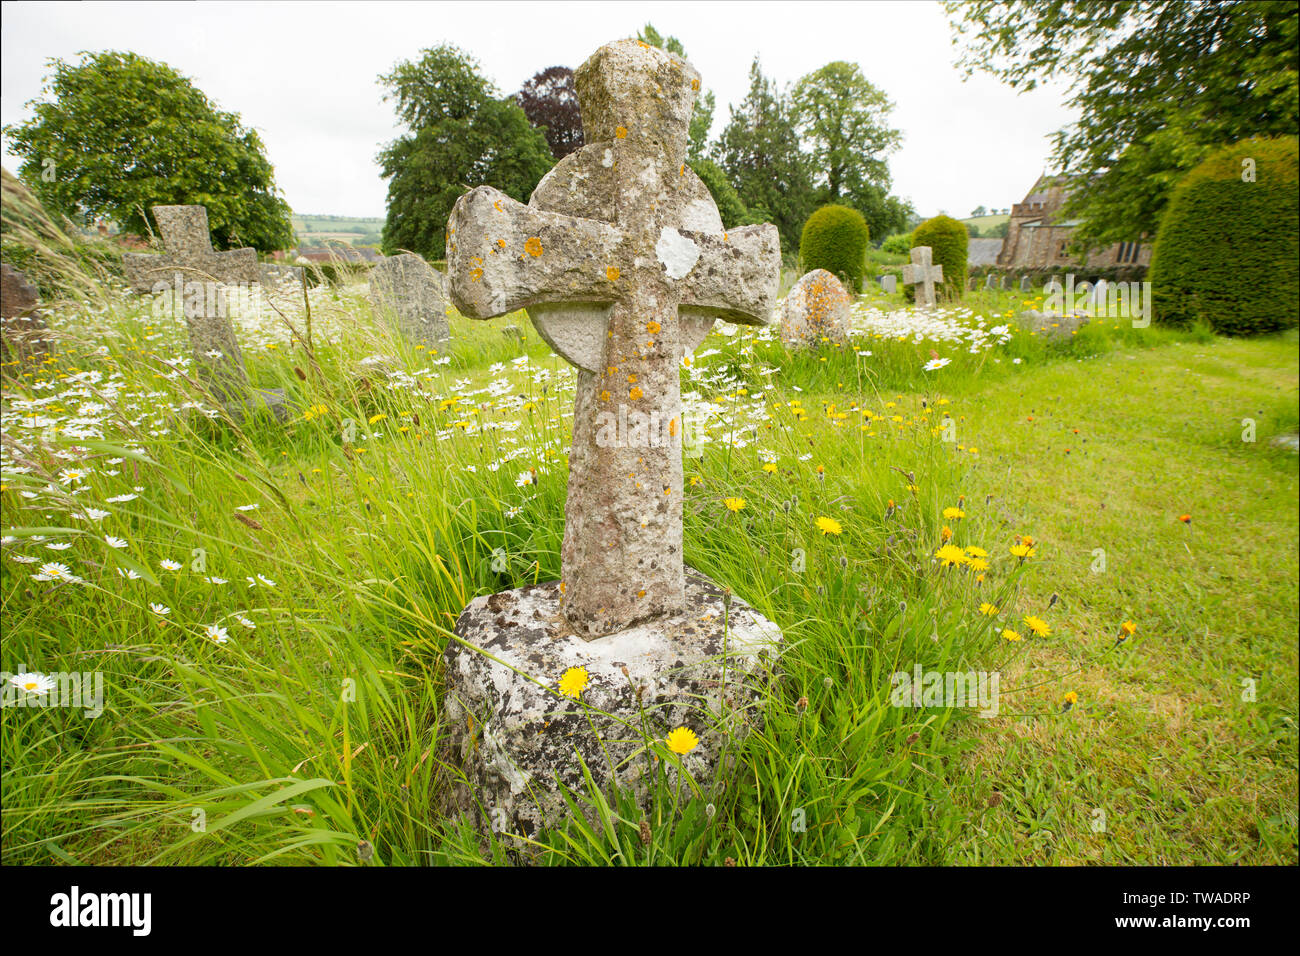 Old gravestones amid wildflowers in the graveyard of St Mary’s Church in the village of Thorncombe, Dorset England UK GB Stock Photo